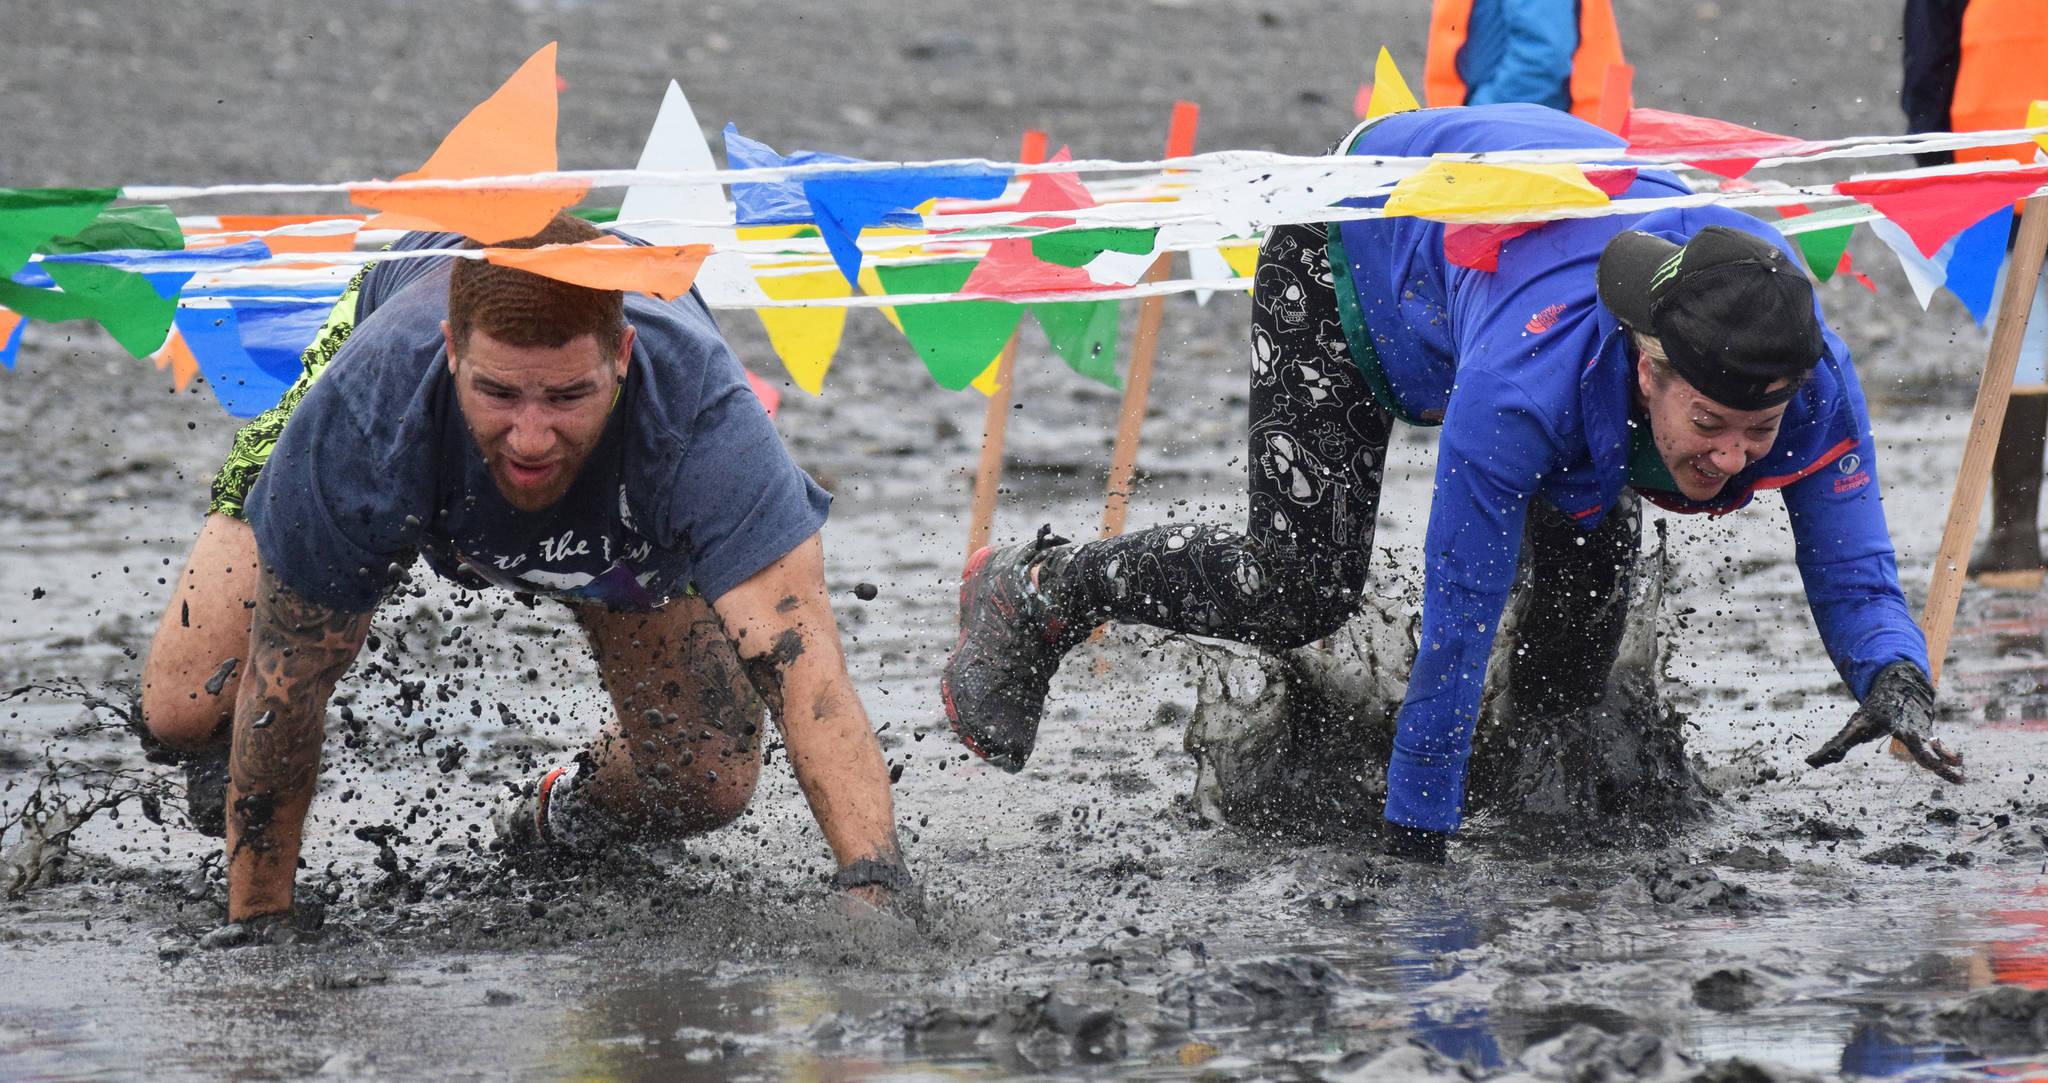 Jay Harris (left) and Megan Anderson race through the mud Saturday, June 15, 2019, at the Ninilchik Clam Scramble Mud and Obstacle Run in Ninilchik, Alaska. (Photo by Joey Klecka/Peninsula Clarion)